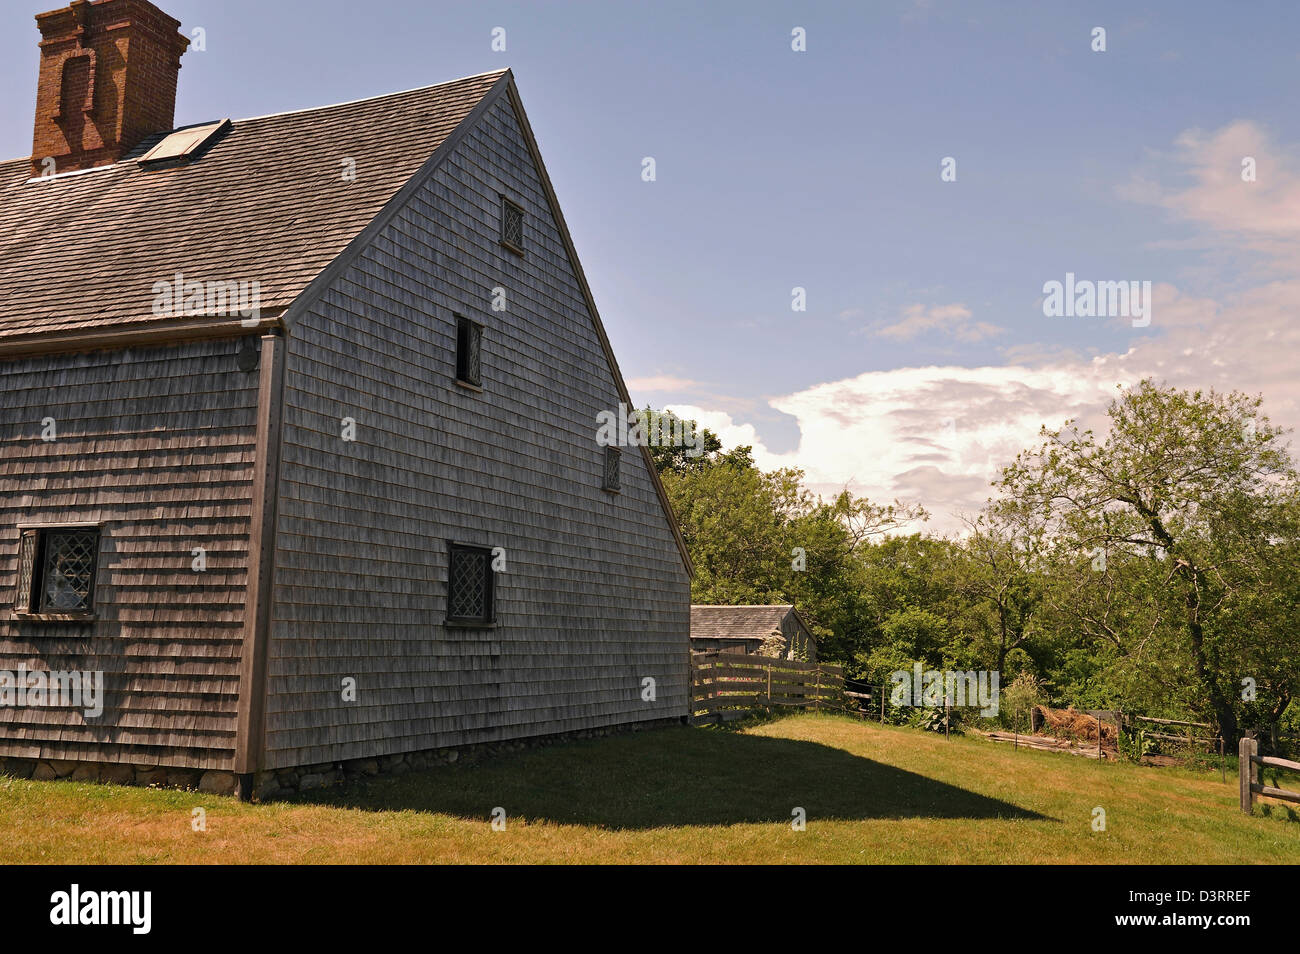 Built in 1686 for Jethro Coffin and wife, Coffin House, oldest residence on Nantucket Island, MA Stock Photo